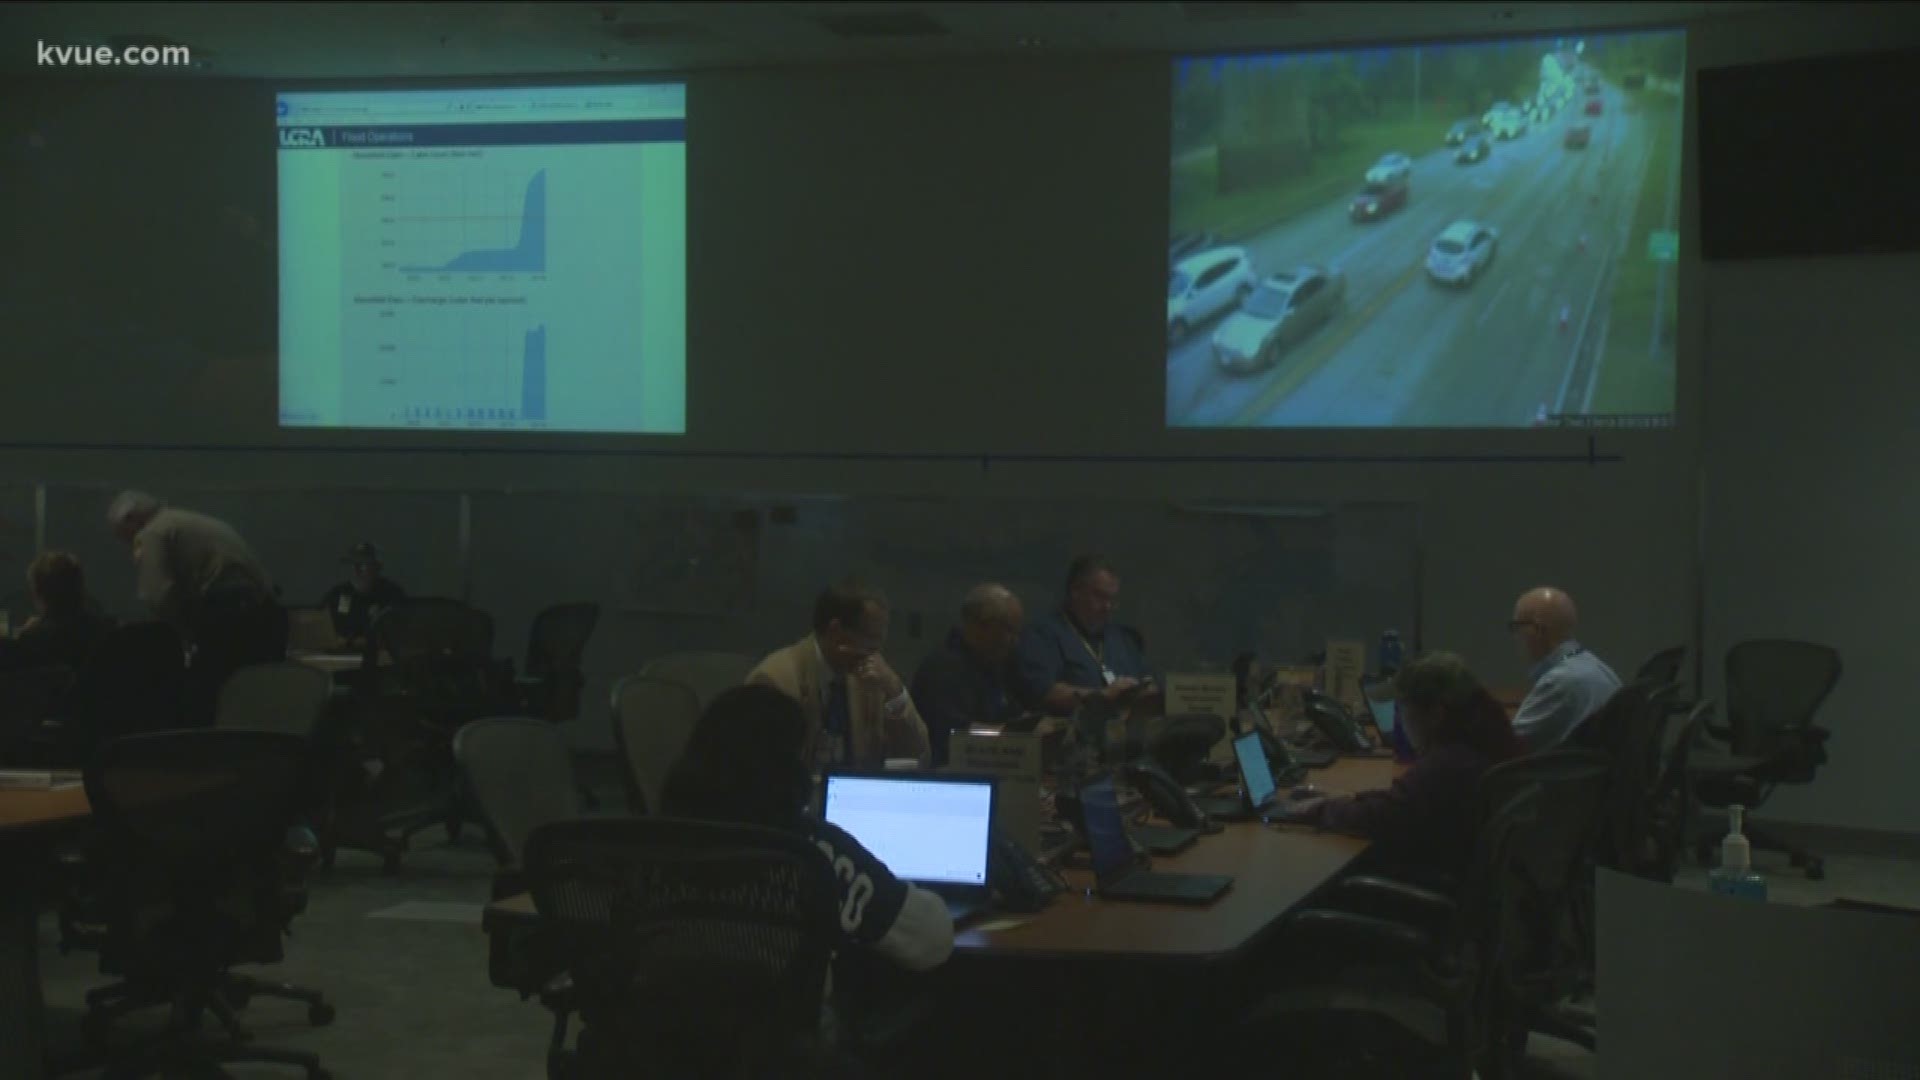 The Austin-Travis County Emergency Operations Center opened Thursday to prepare for more possible flooding help.